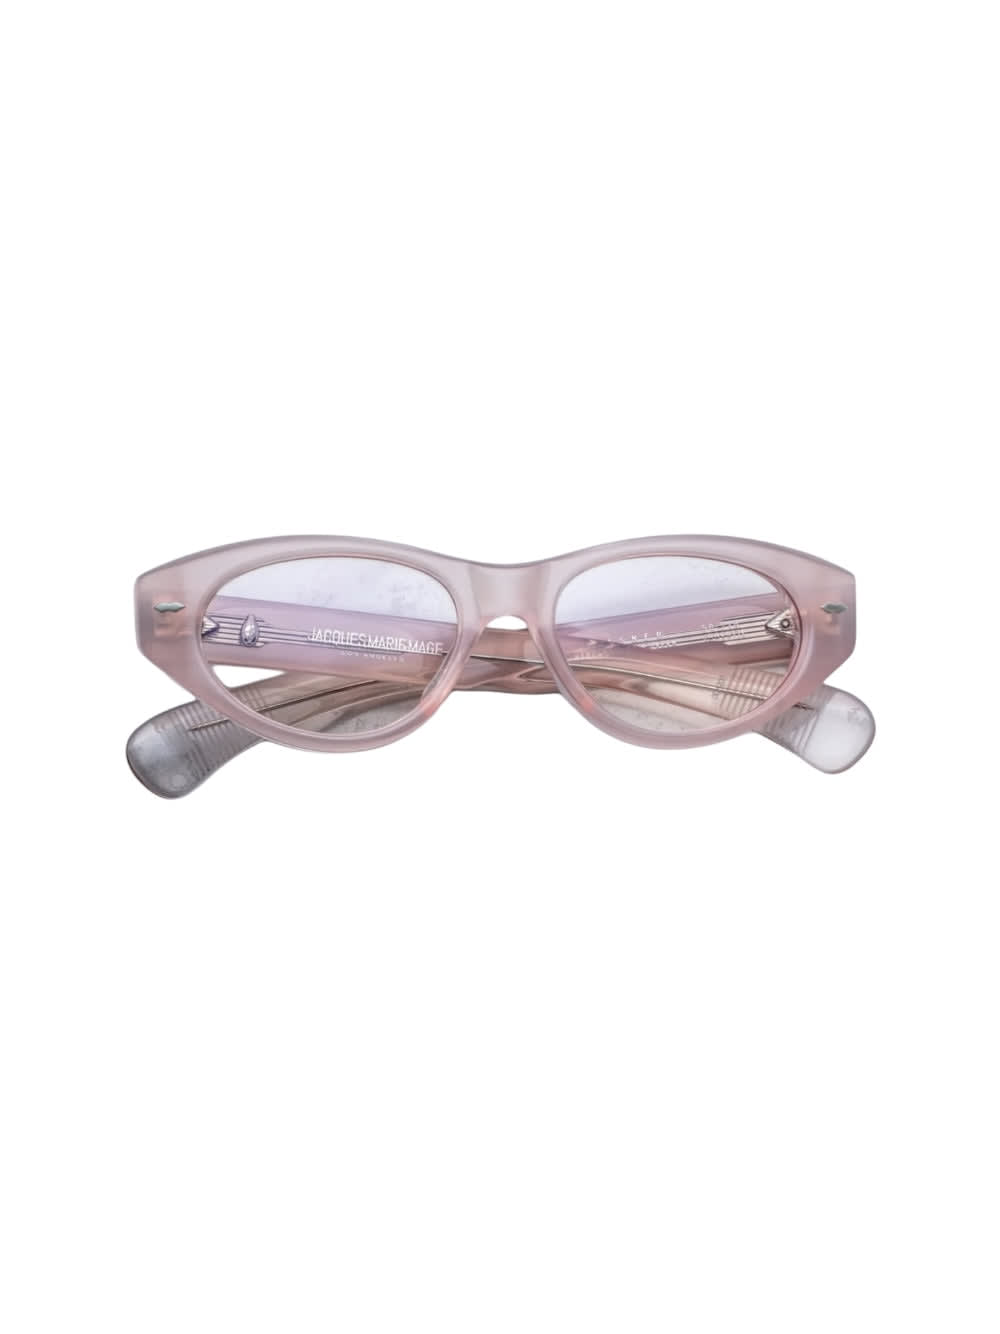 Jacques Marie Mage Krasner Rx - Peach Sunglasses In Pink